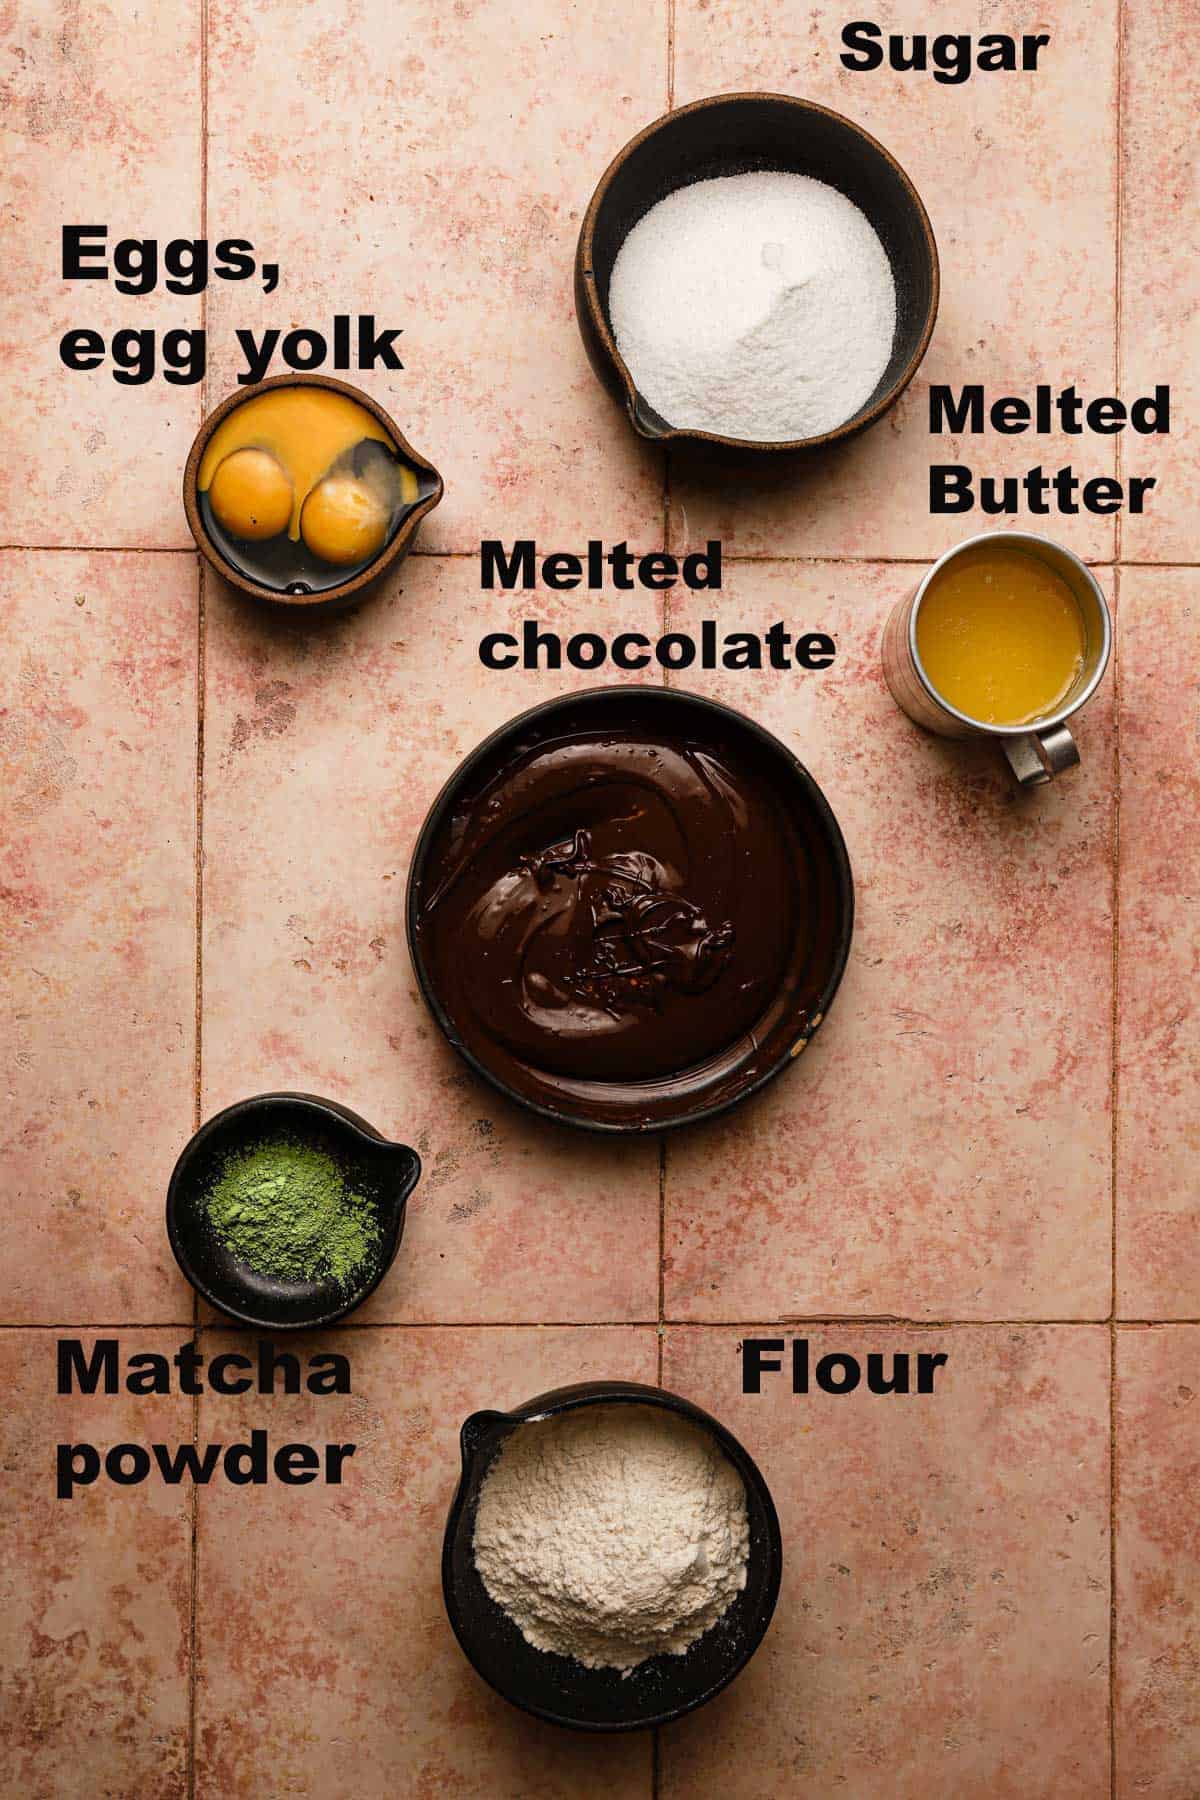 Ingredients in bowls melted chocolate, matcha powder, flour, melted butter, eggs, sugar